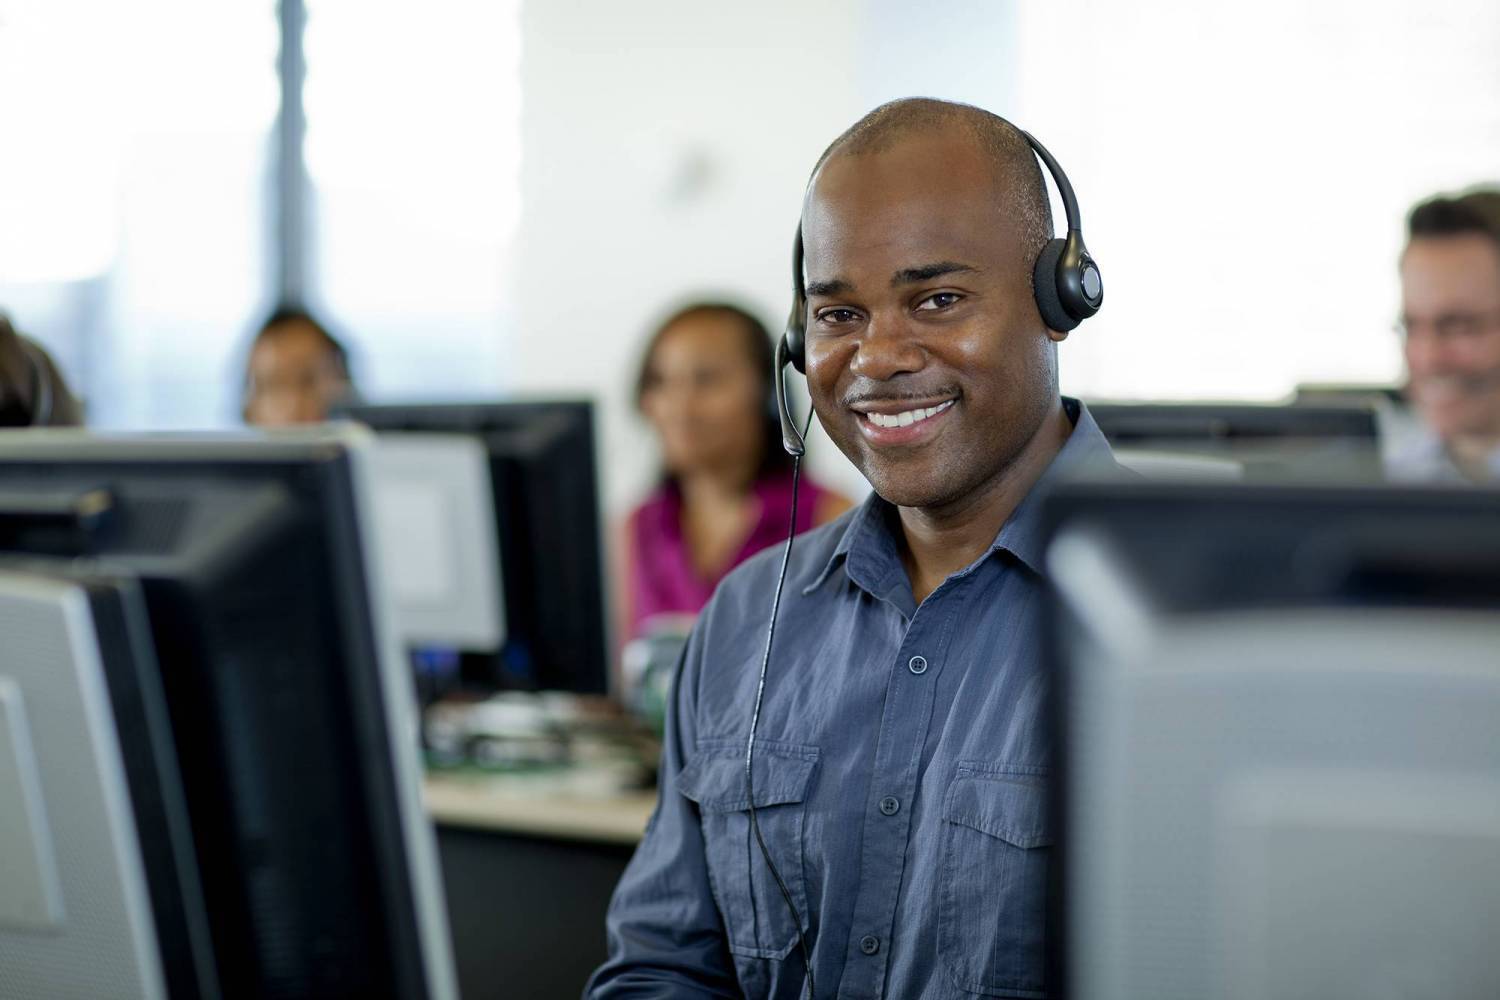 Rest Assured remote support professionals assist and watch over our clients around the clock.